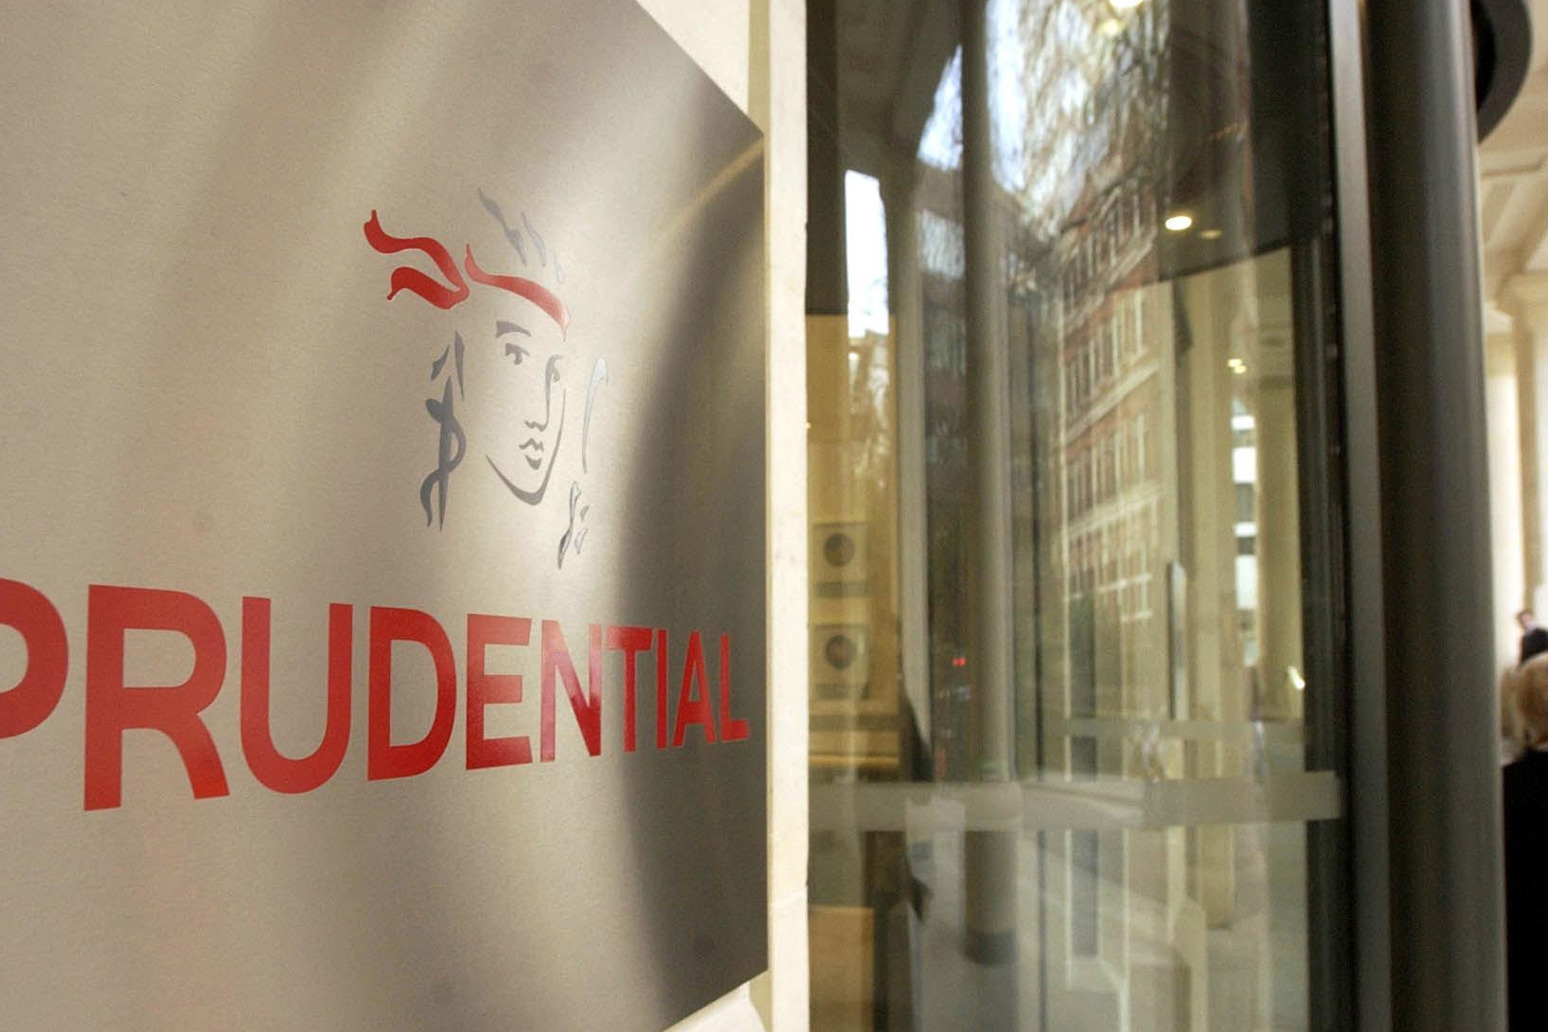 New Prudential boss set to lay out growth strategy 